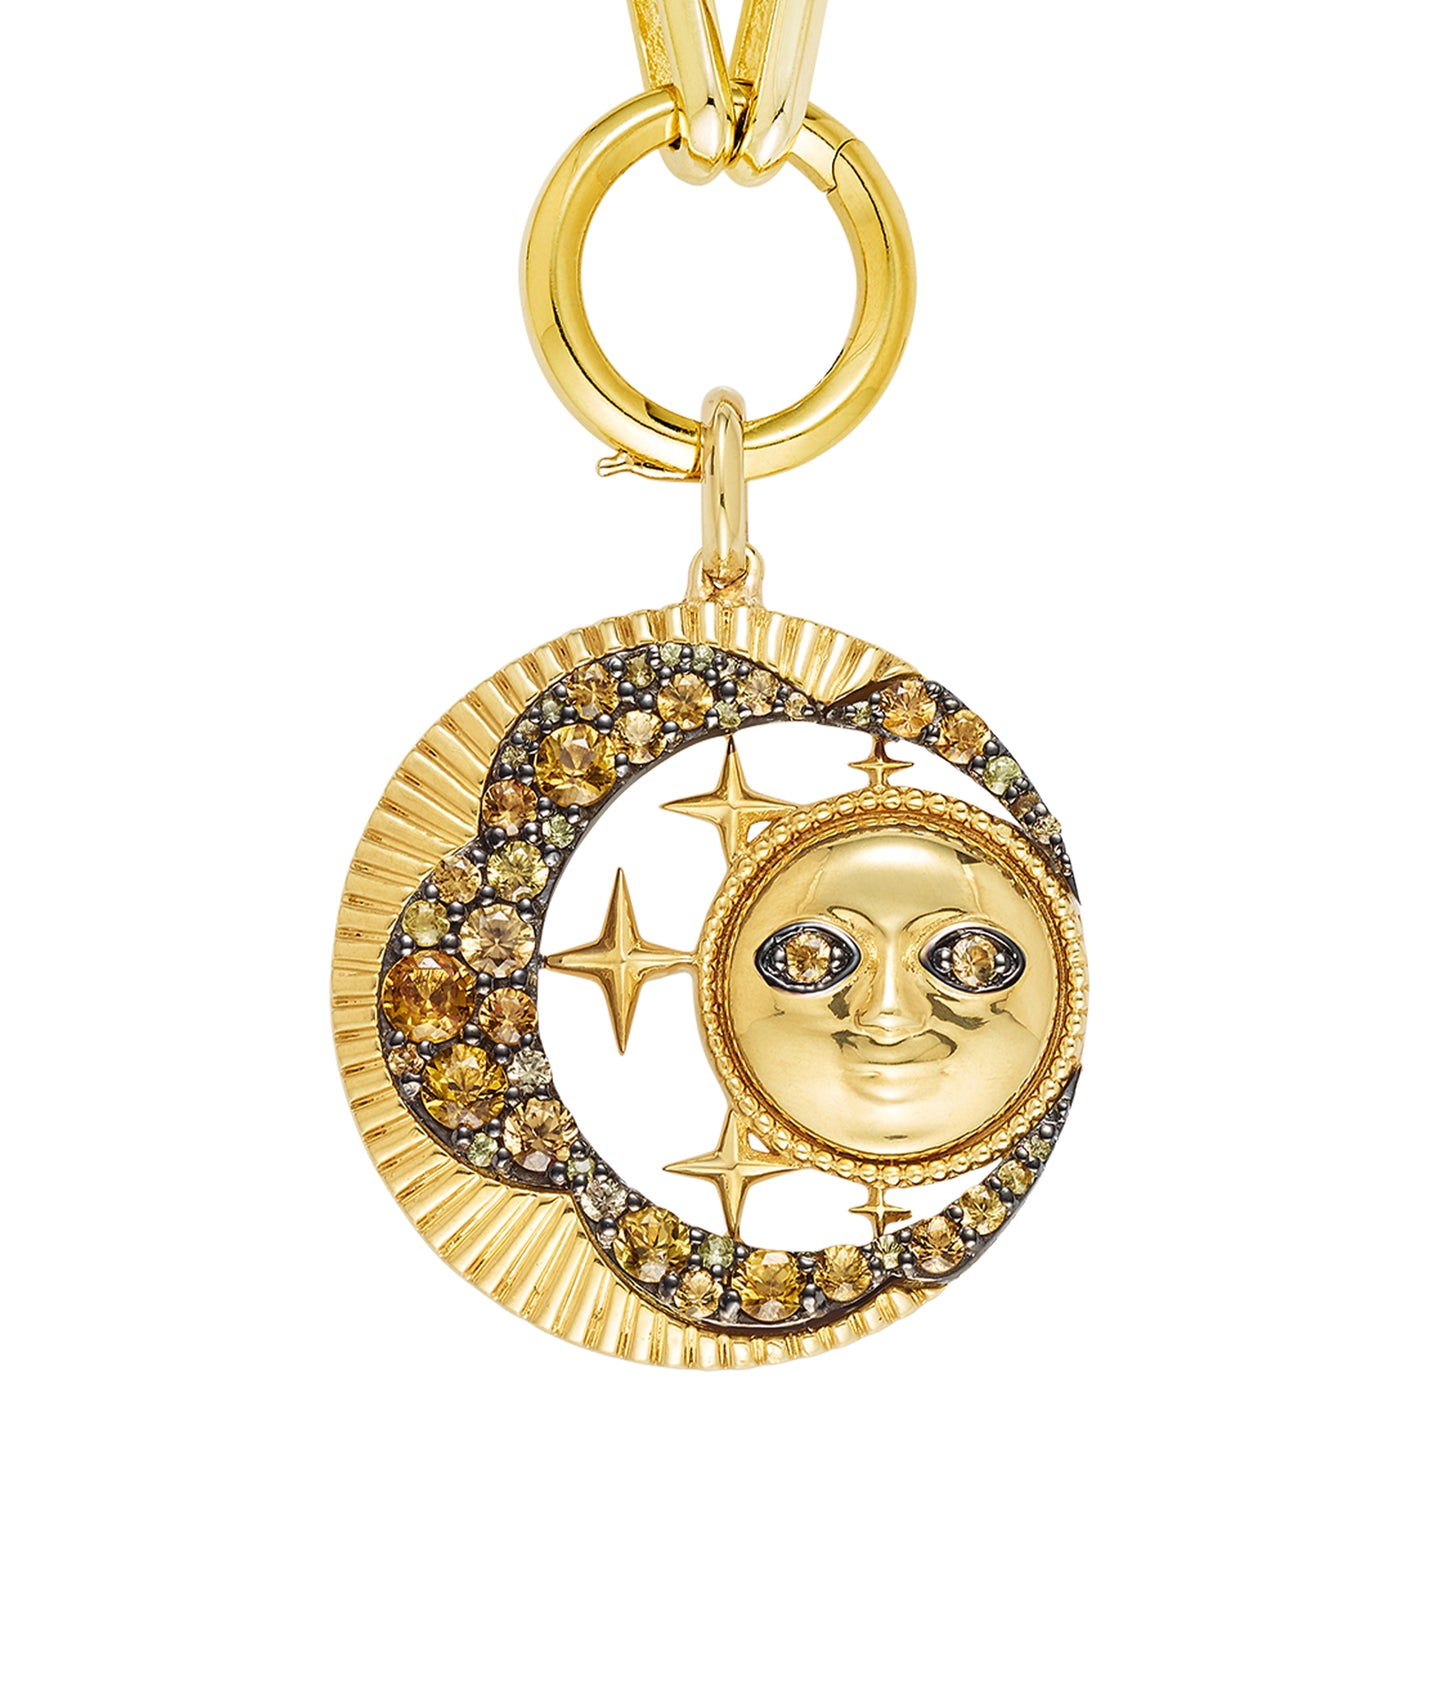 'Look Up At The Moon' Pendant Citrine